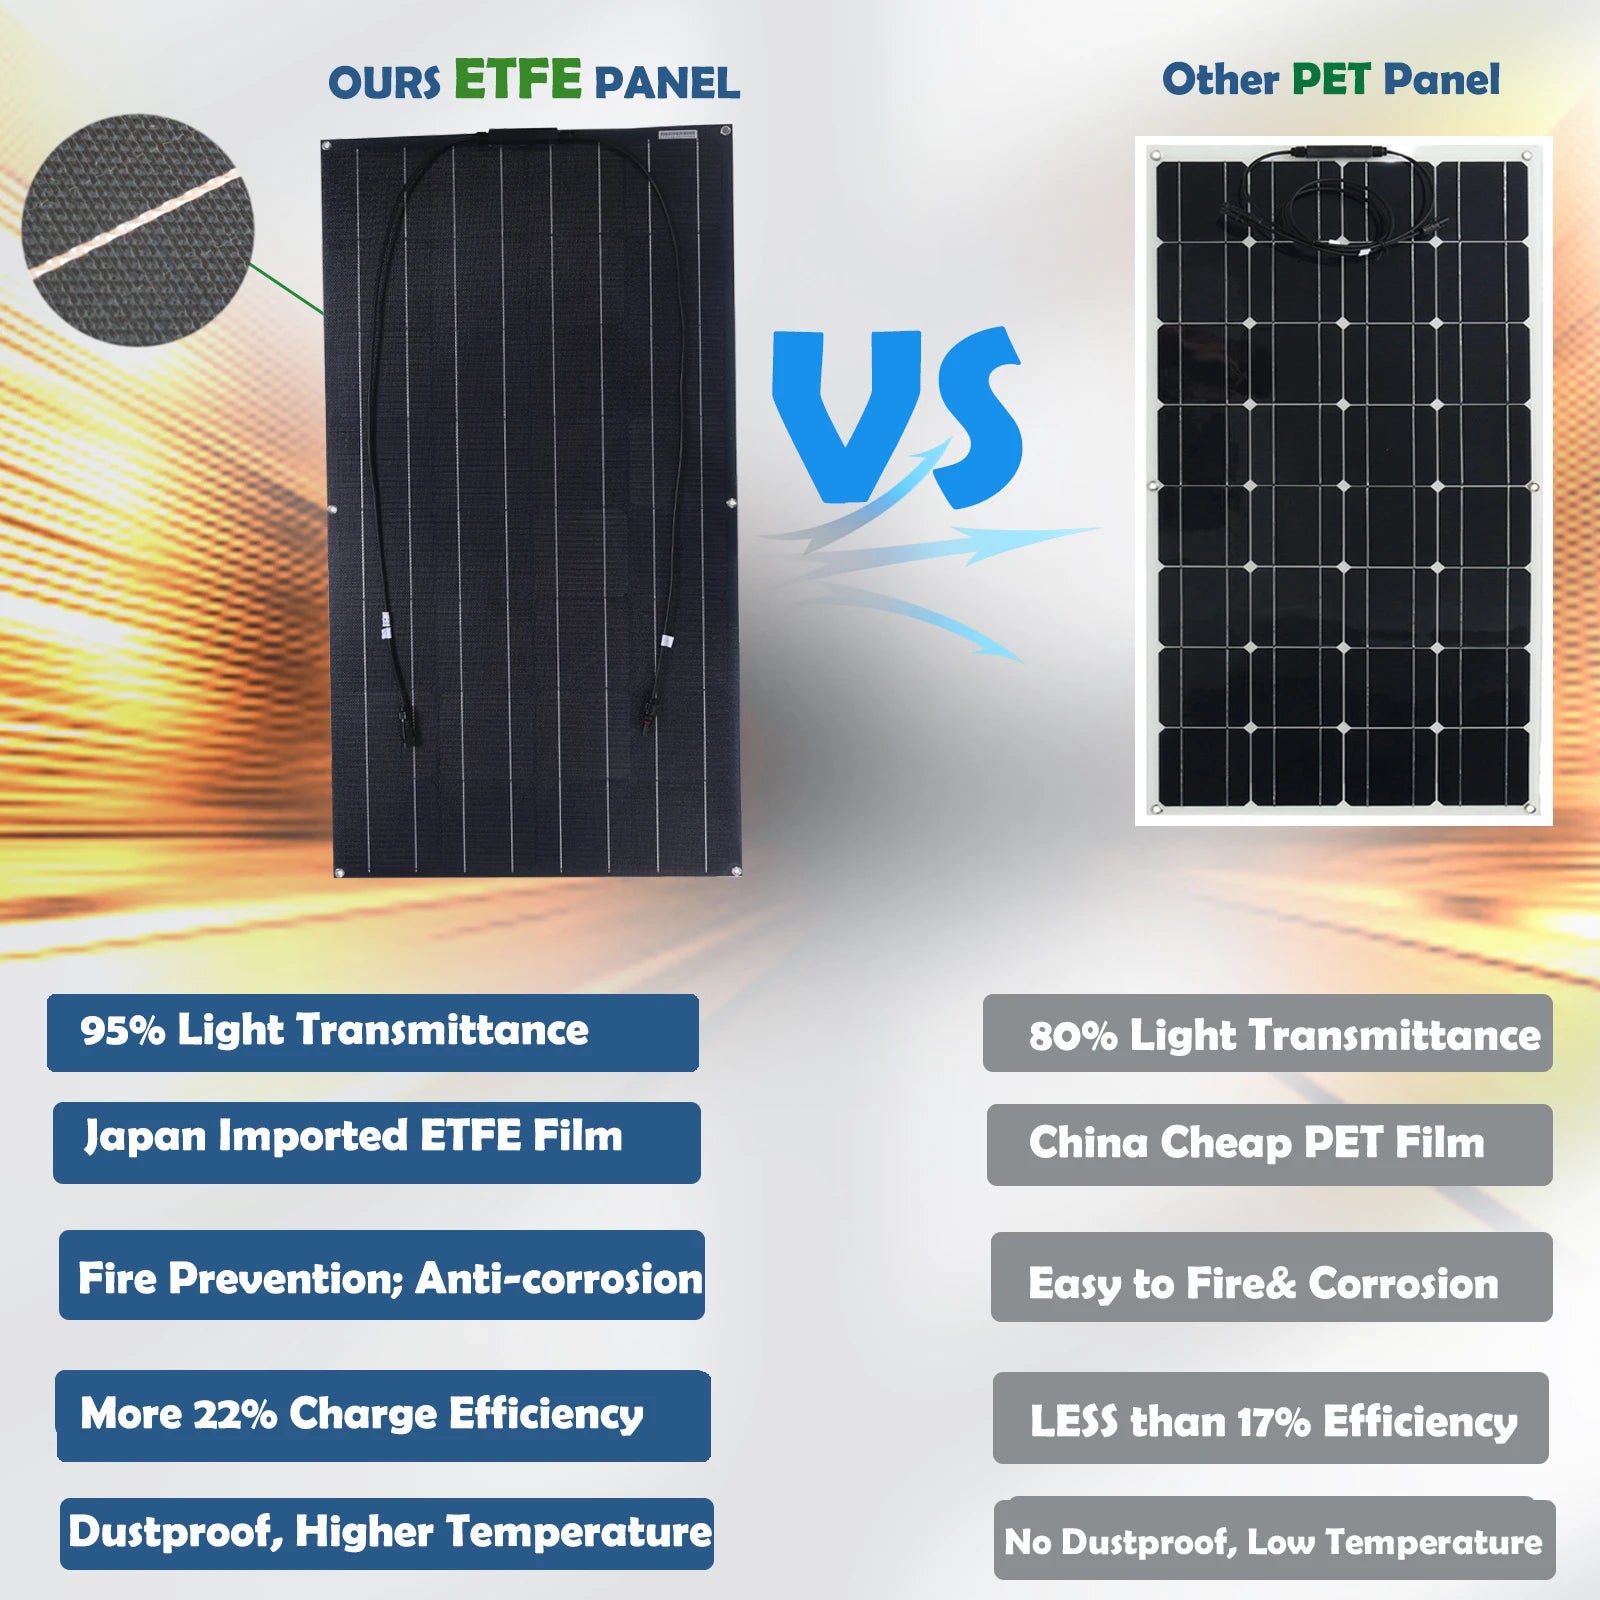 Jingyang Solar Panel, Superior solar panel with high light transmittance and efficiency, offering better heat resistance, fire prevention, and durability.